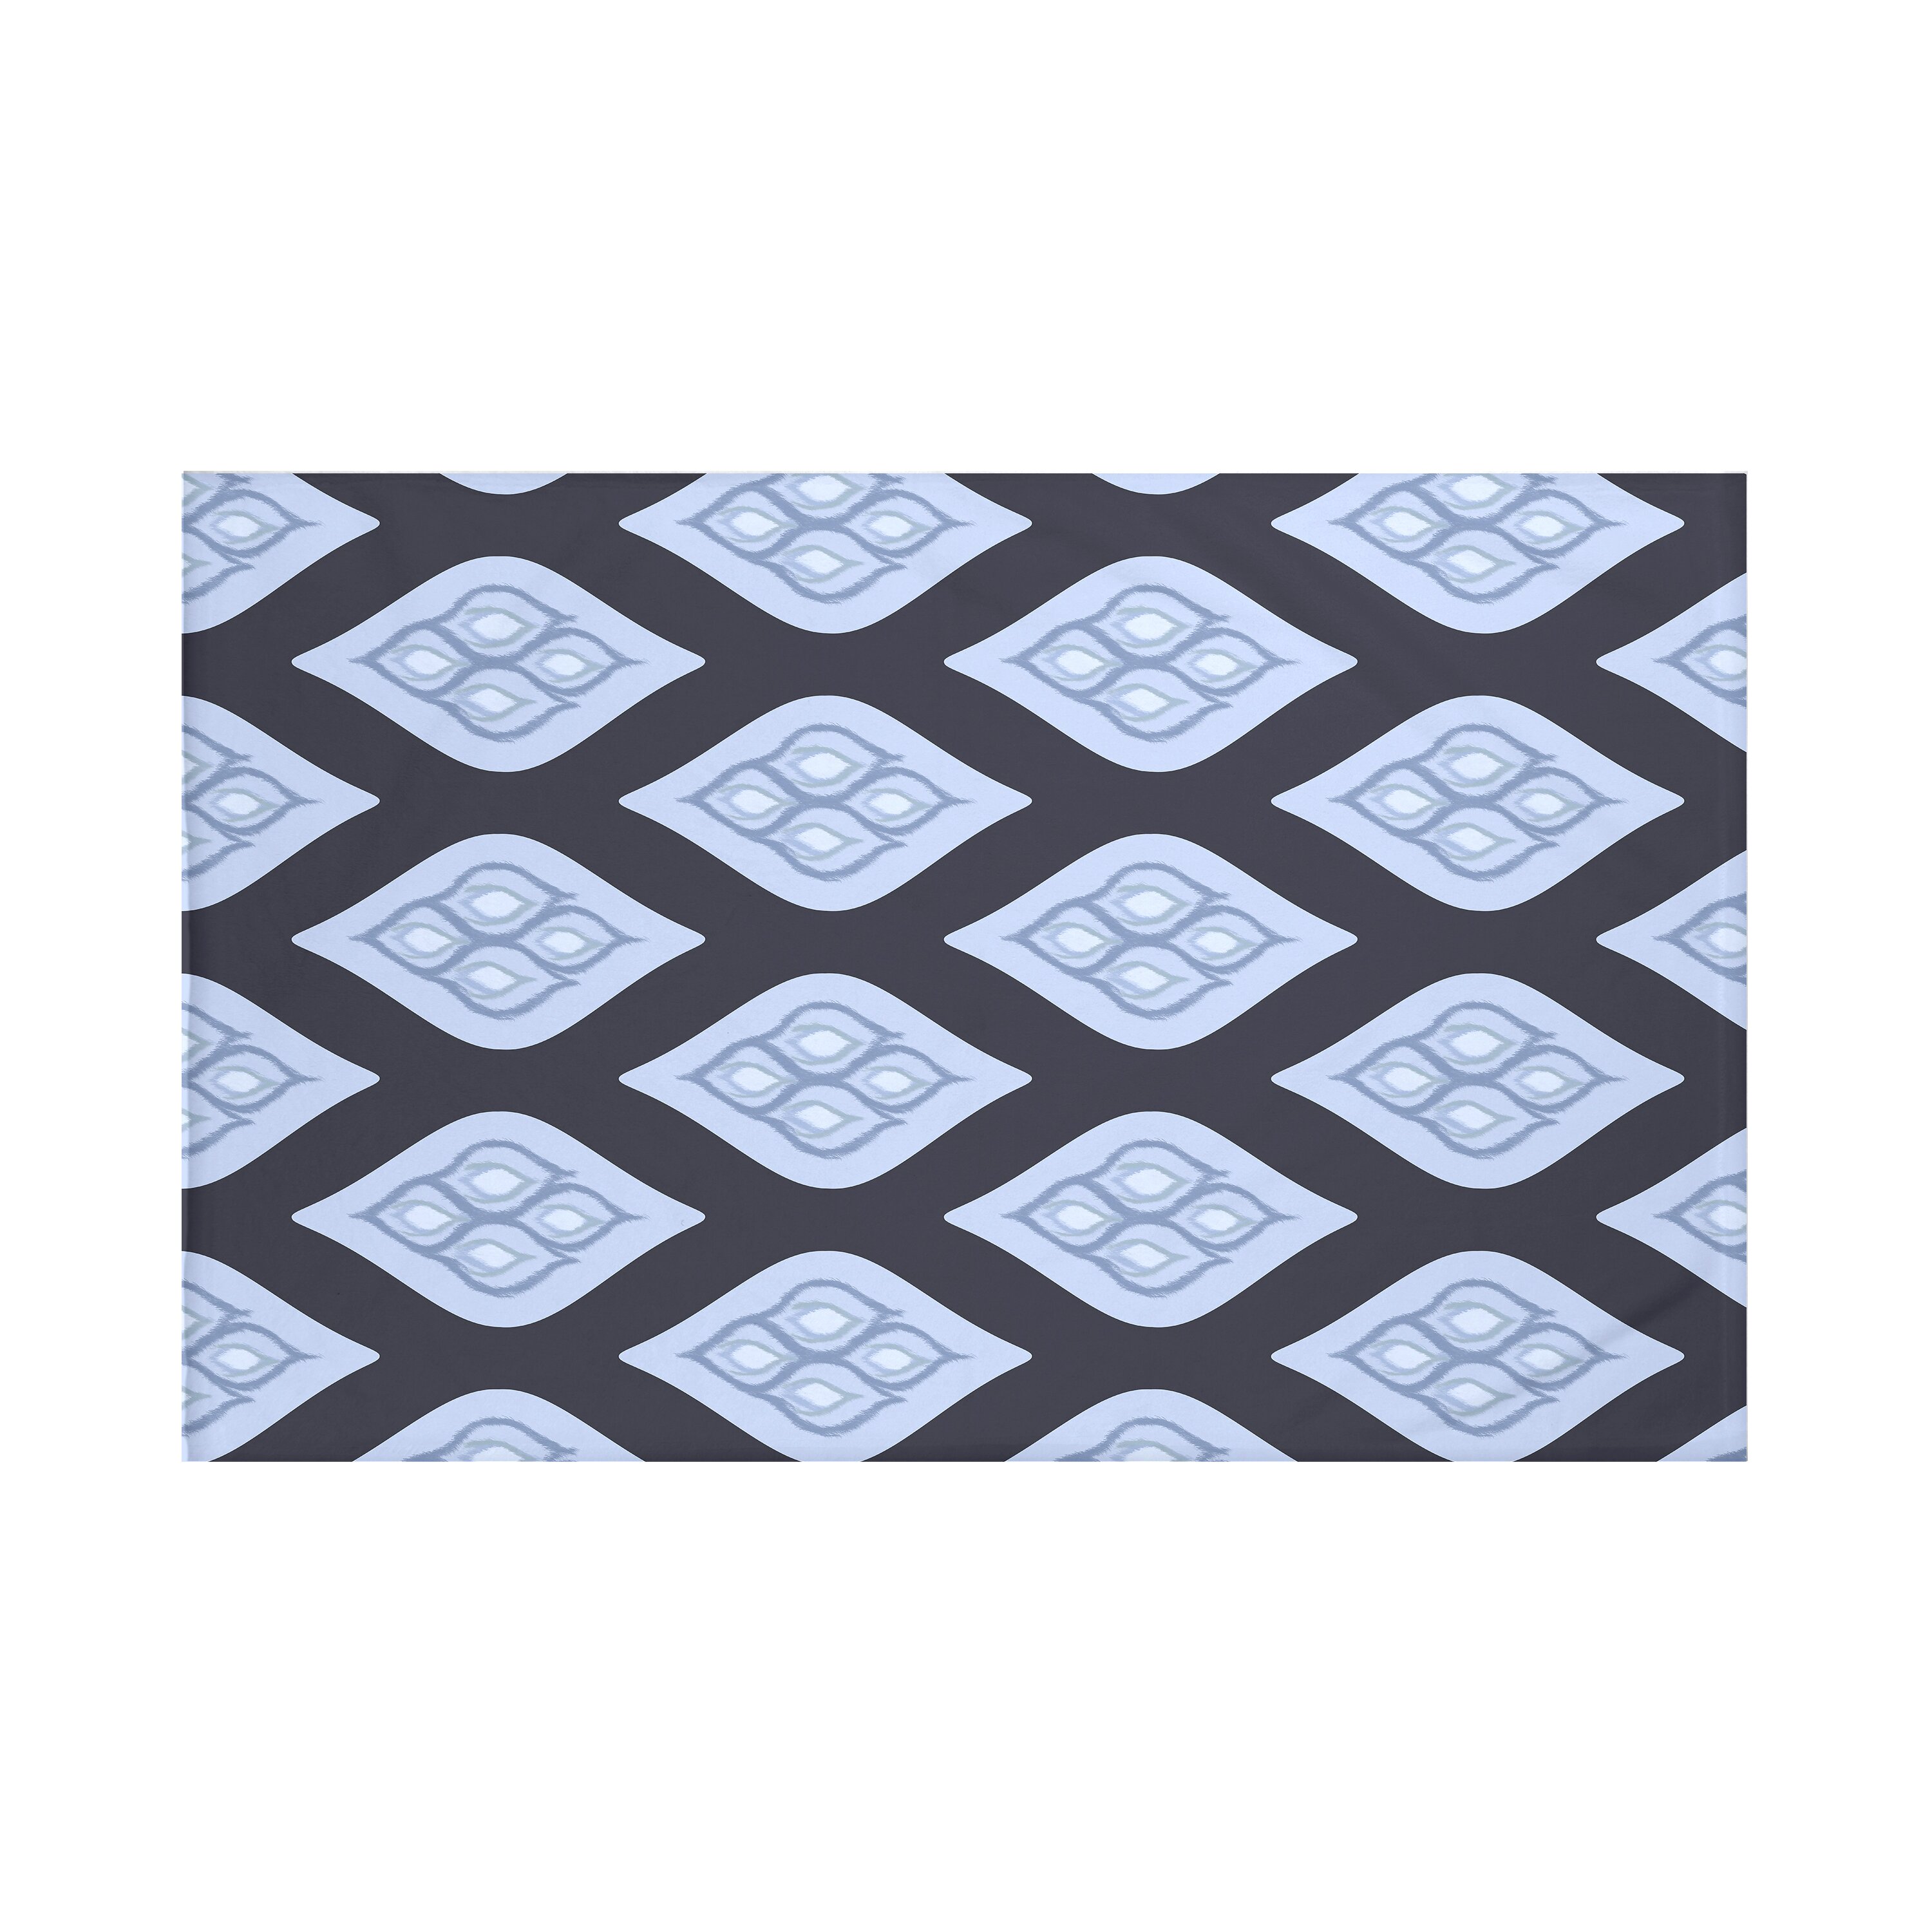 Tail Feathers Geometric Print Throw Blanket by e by design